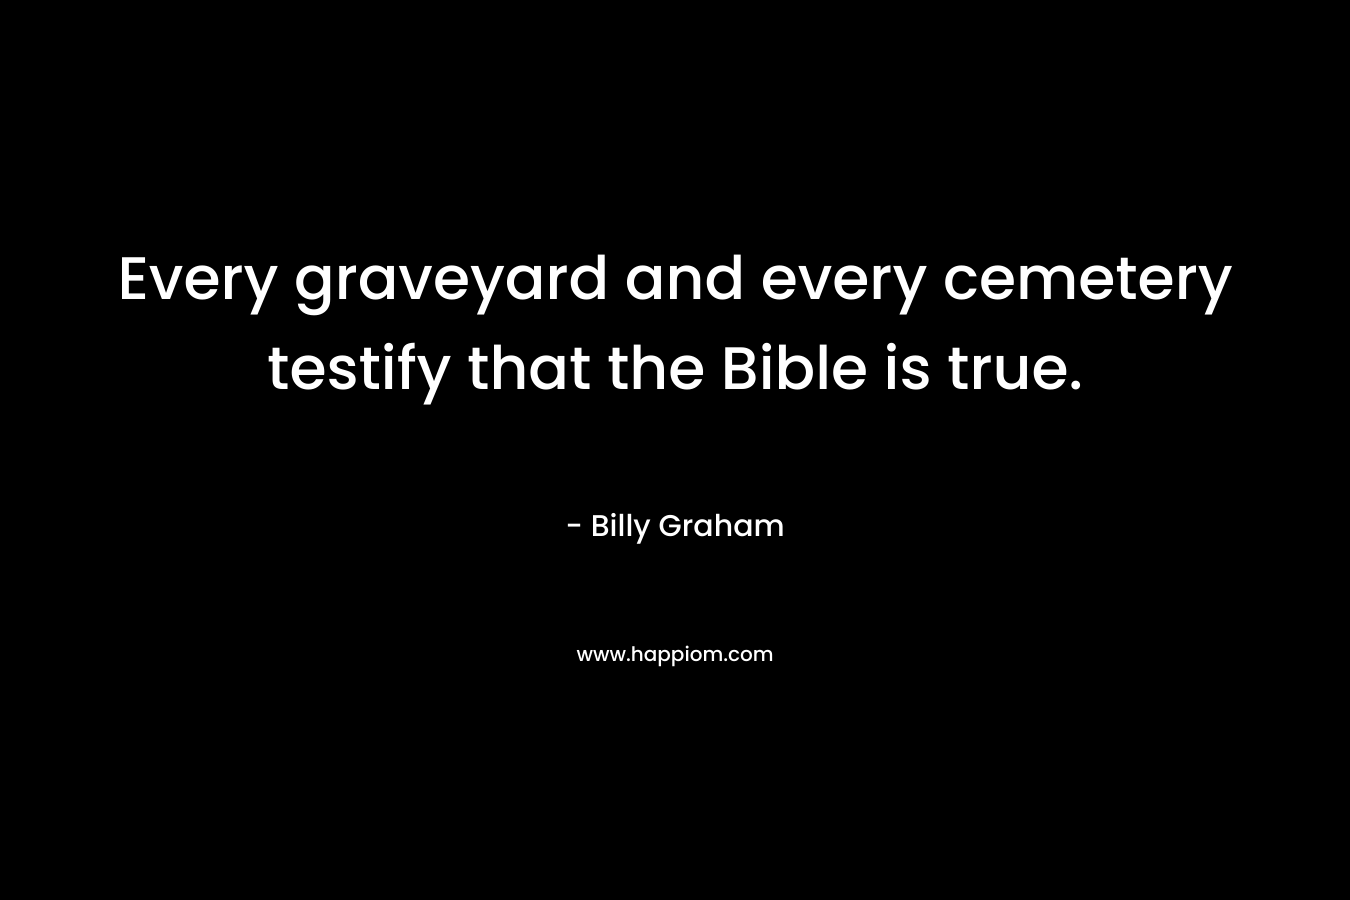 Every graveyard and every cemetery testify that the Bible is true. – Billy Graham